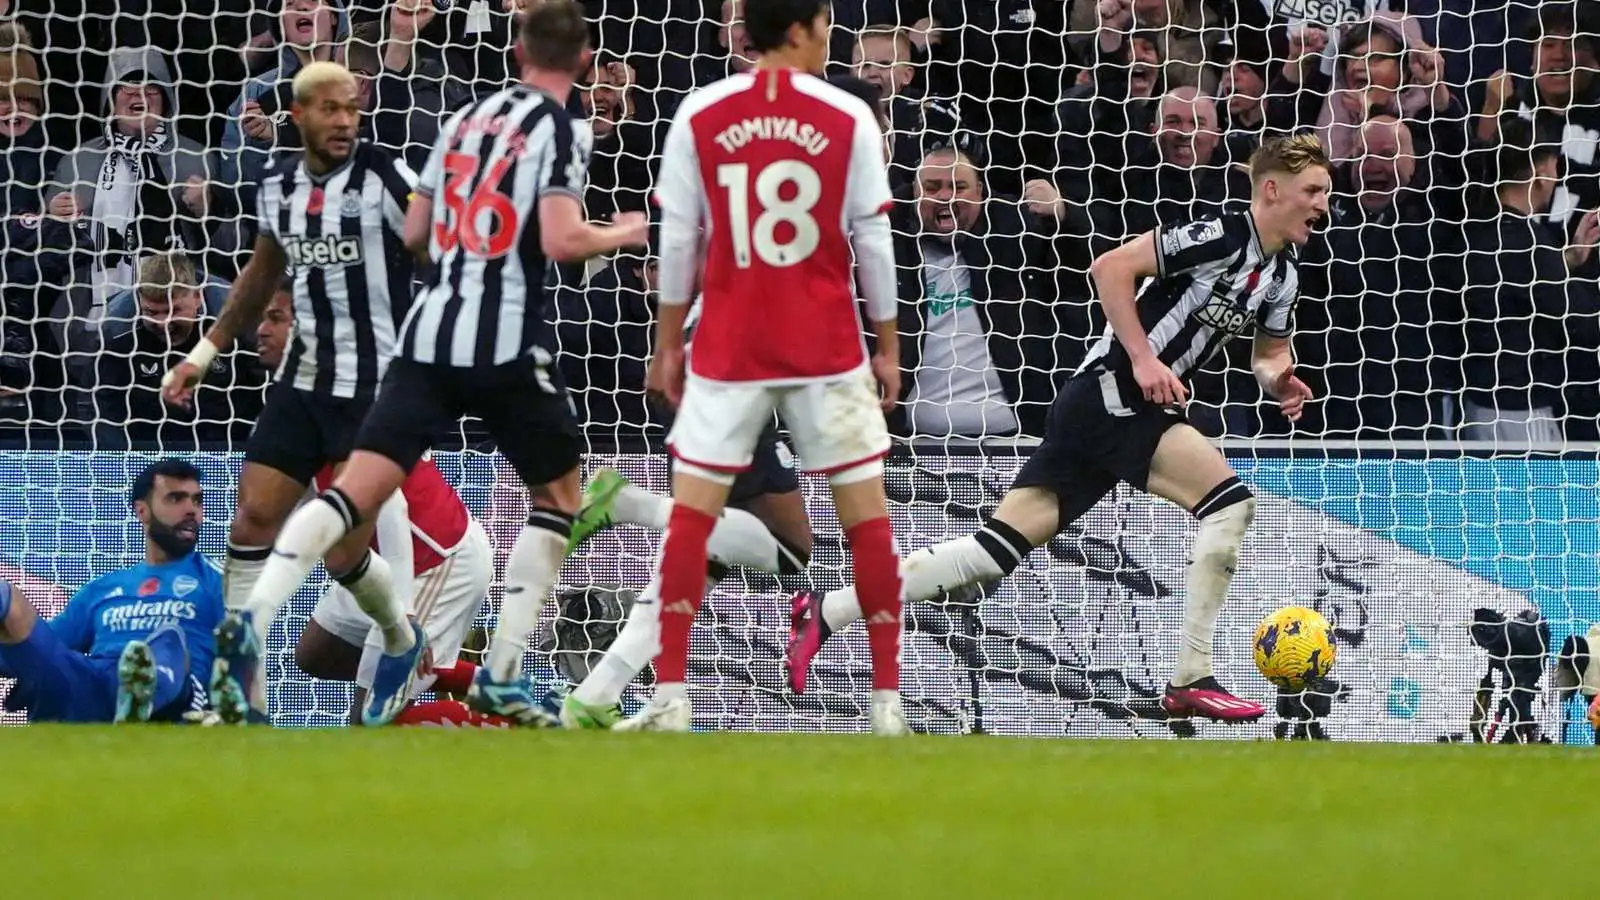 Newcastle 1 0 Arsenal Gordon Nets Controversial Winner Thanks To Var Assist In Heated Prem Clash